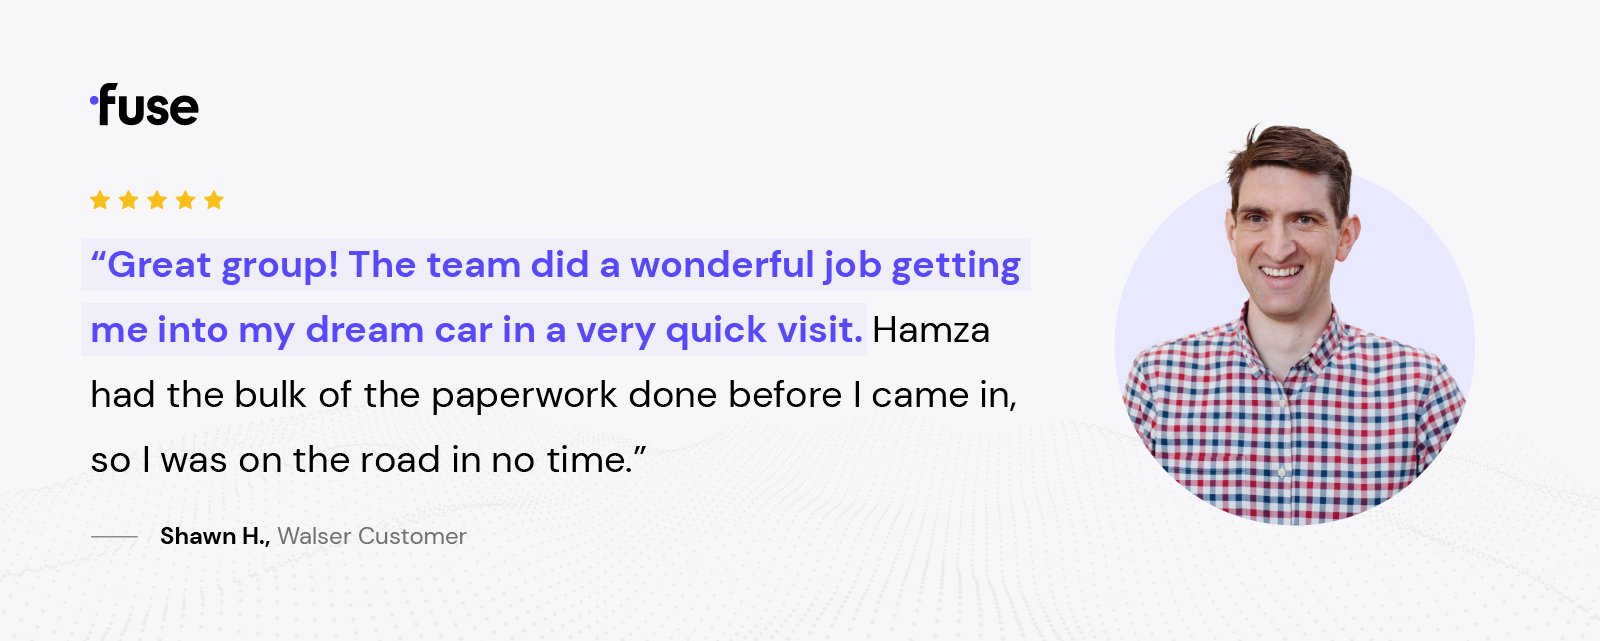 "great group!" The team did a wonderful job getting me into my dream car in a very quick visit. Hamza had the bulk of the paperwork done before I came in, so I was on the road in no time." -Shawn H., Walser Customer